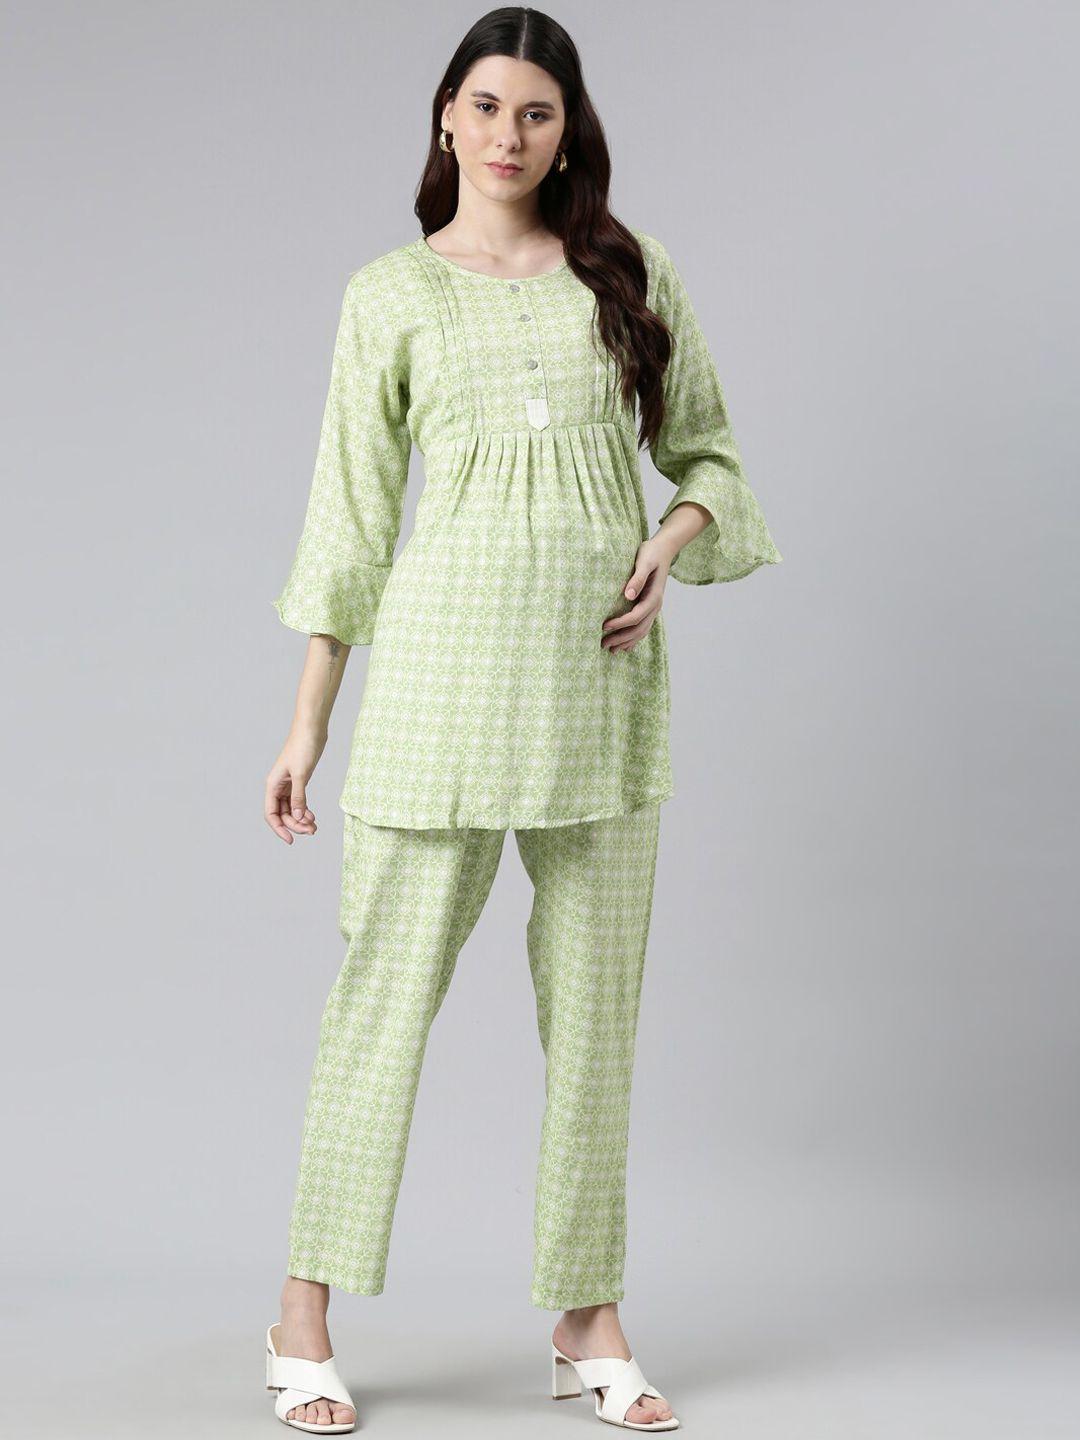 goldstroms printed maternity tunic & trousers